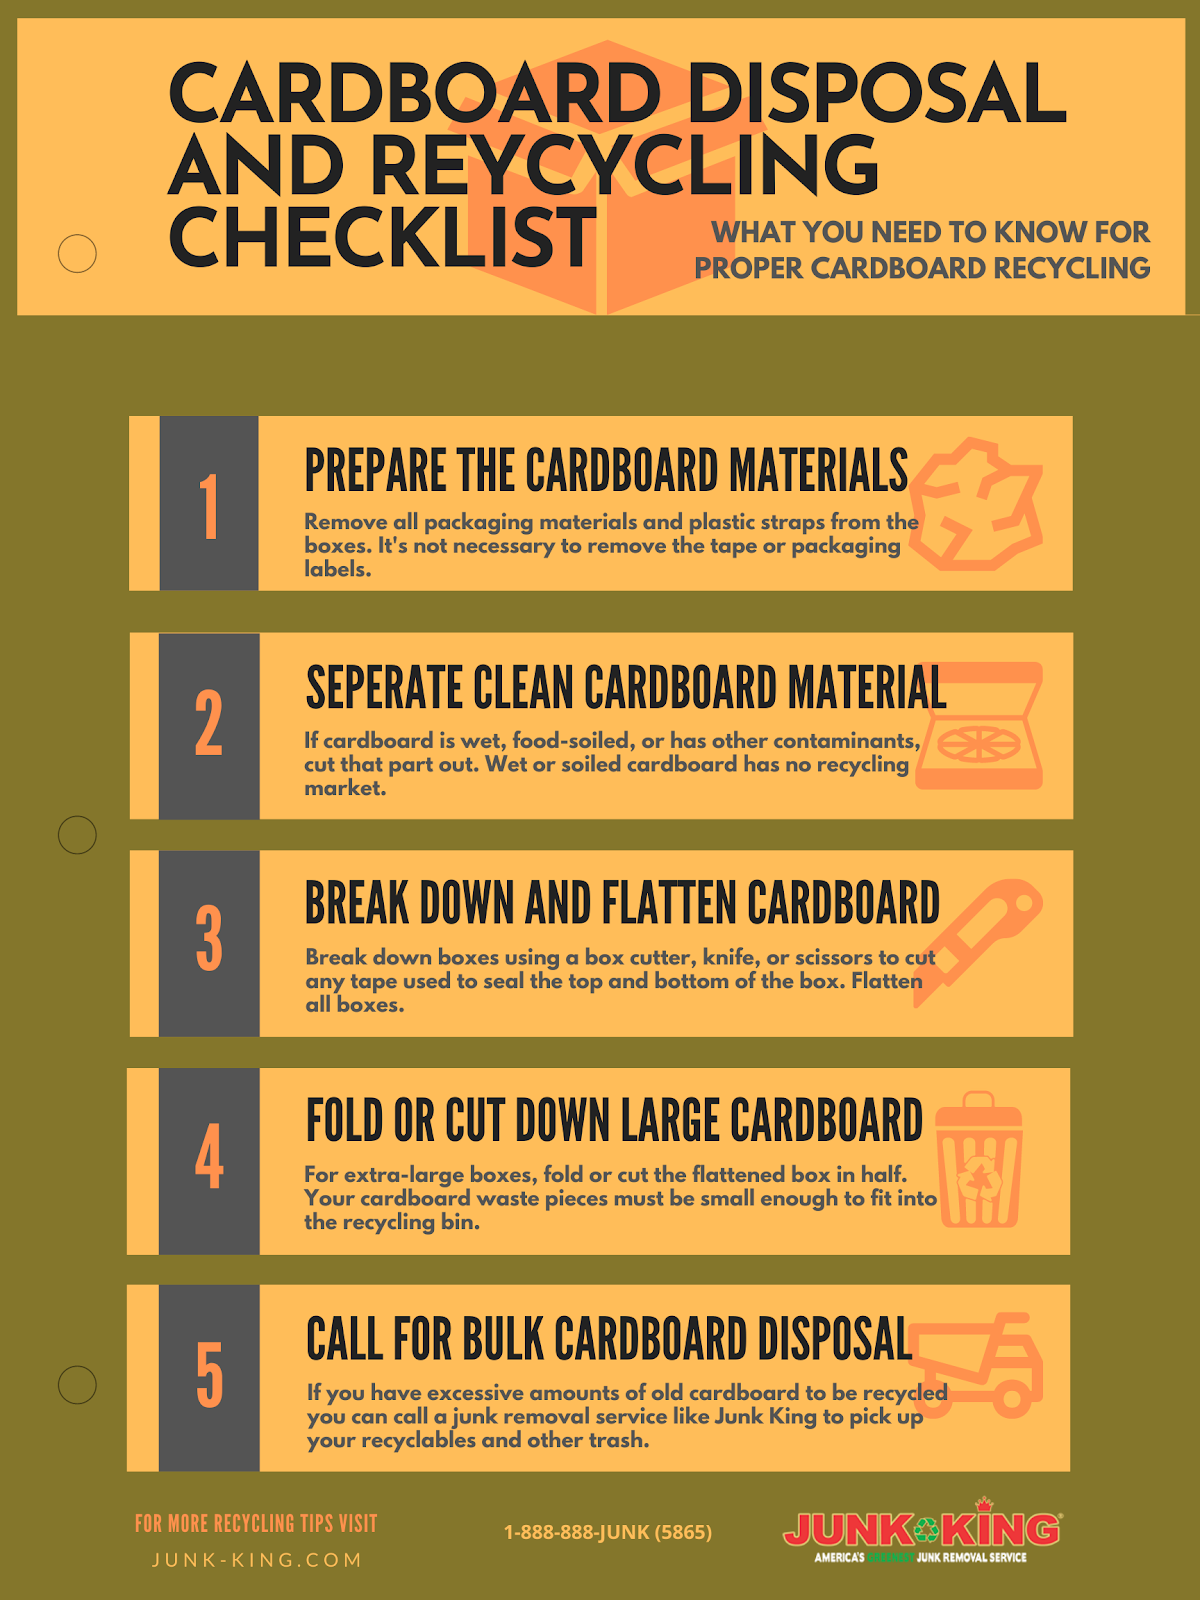 Cardboard disposal and recycling checklist